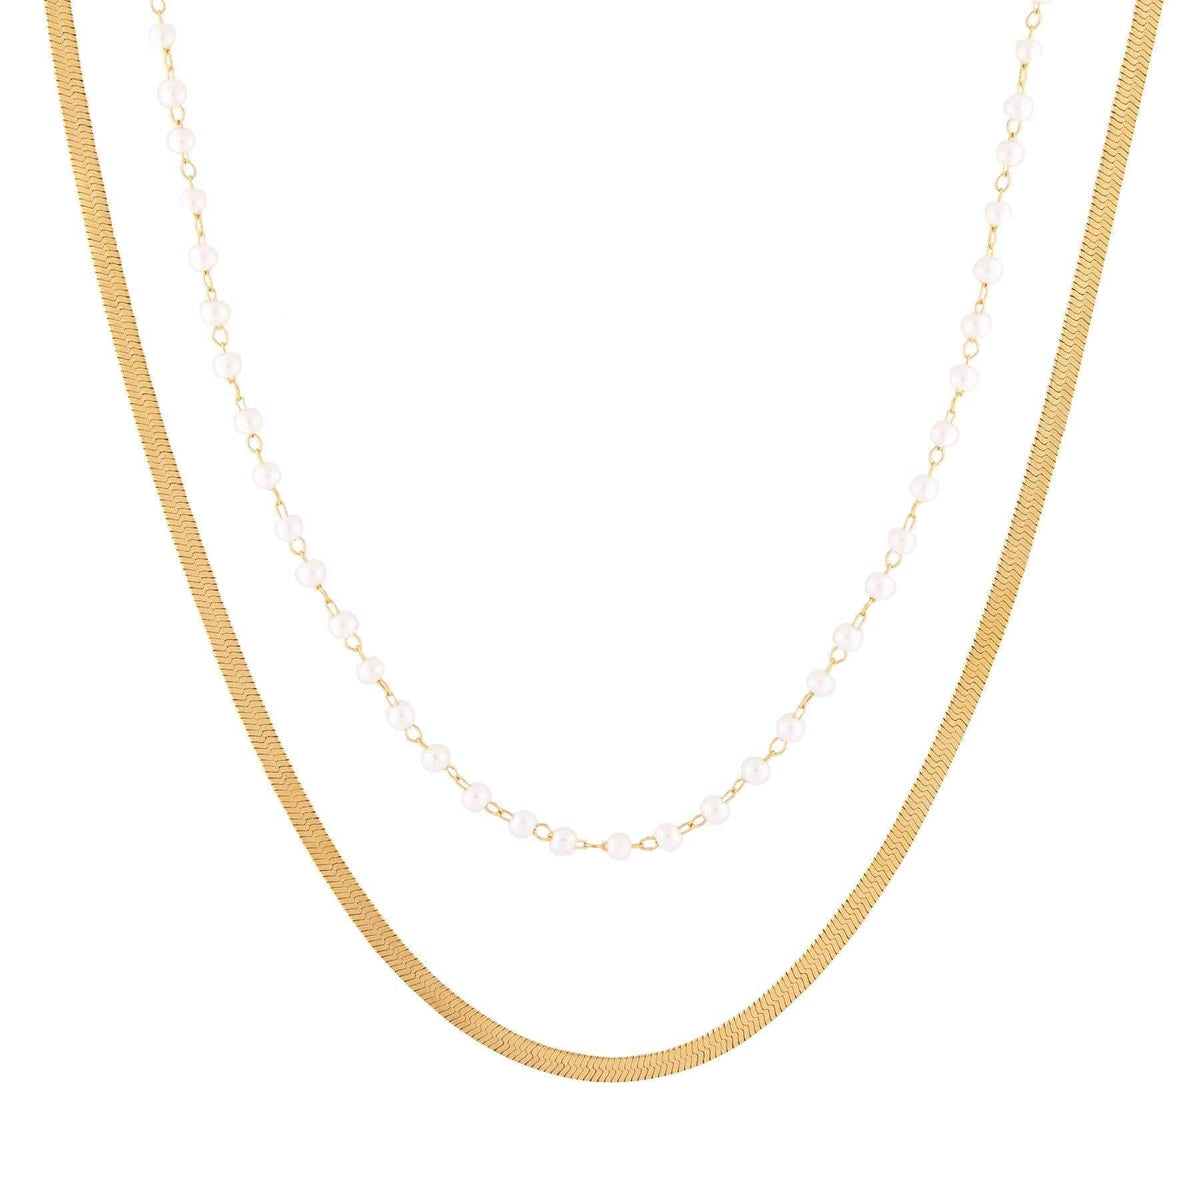 BohoMoon Stainless Steel Siesta Layered Pearl Necklace Gold